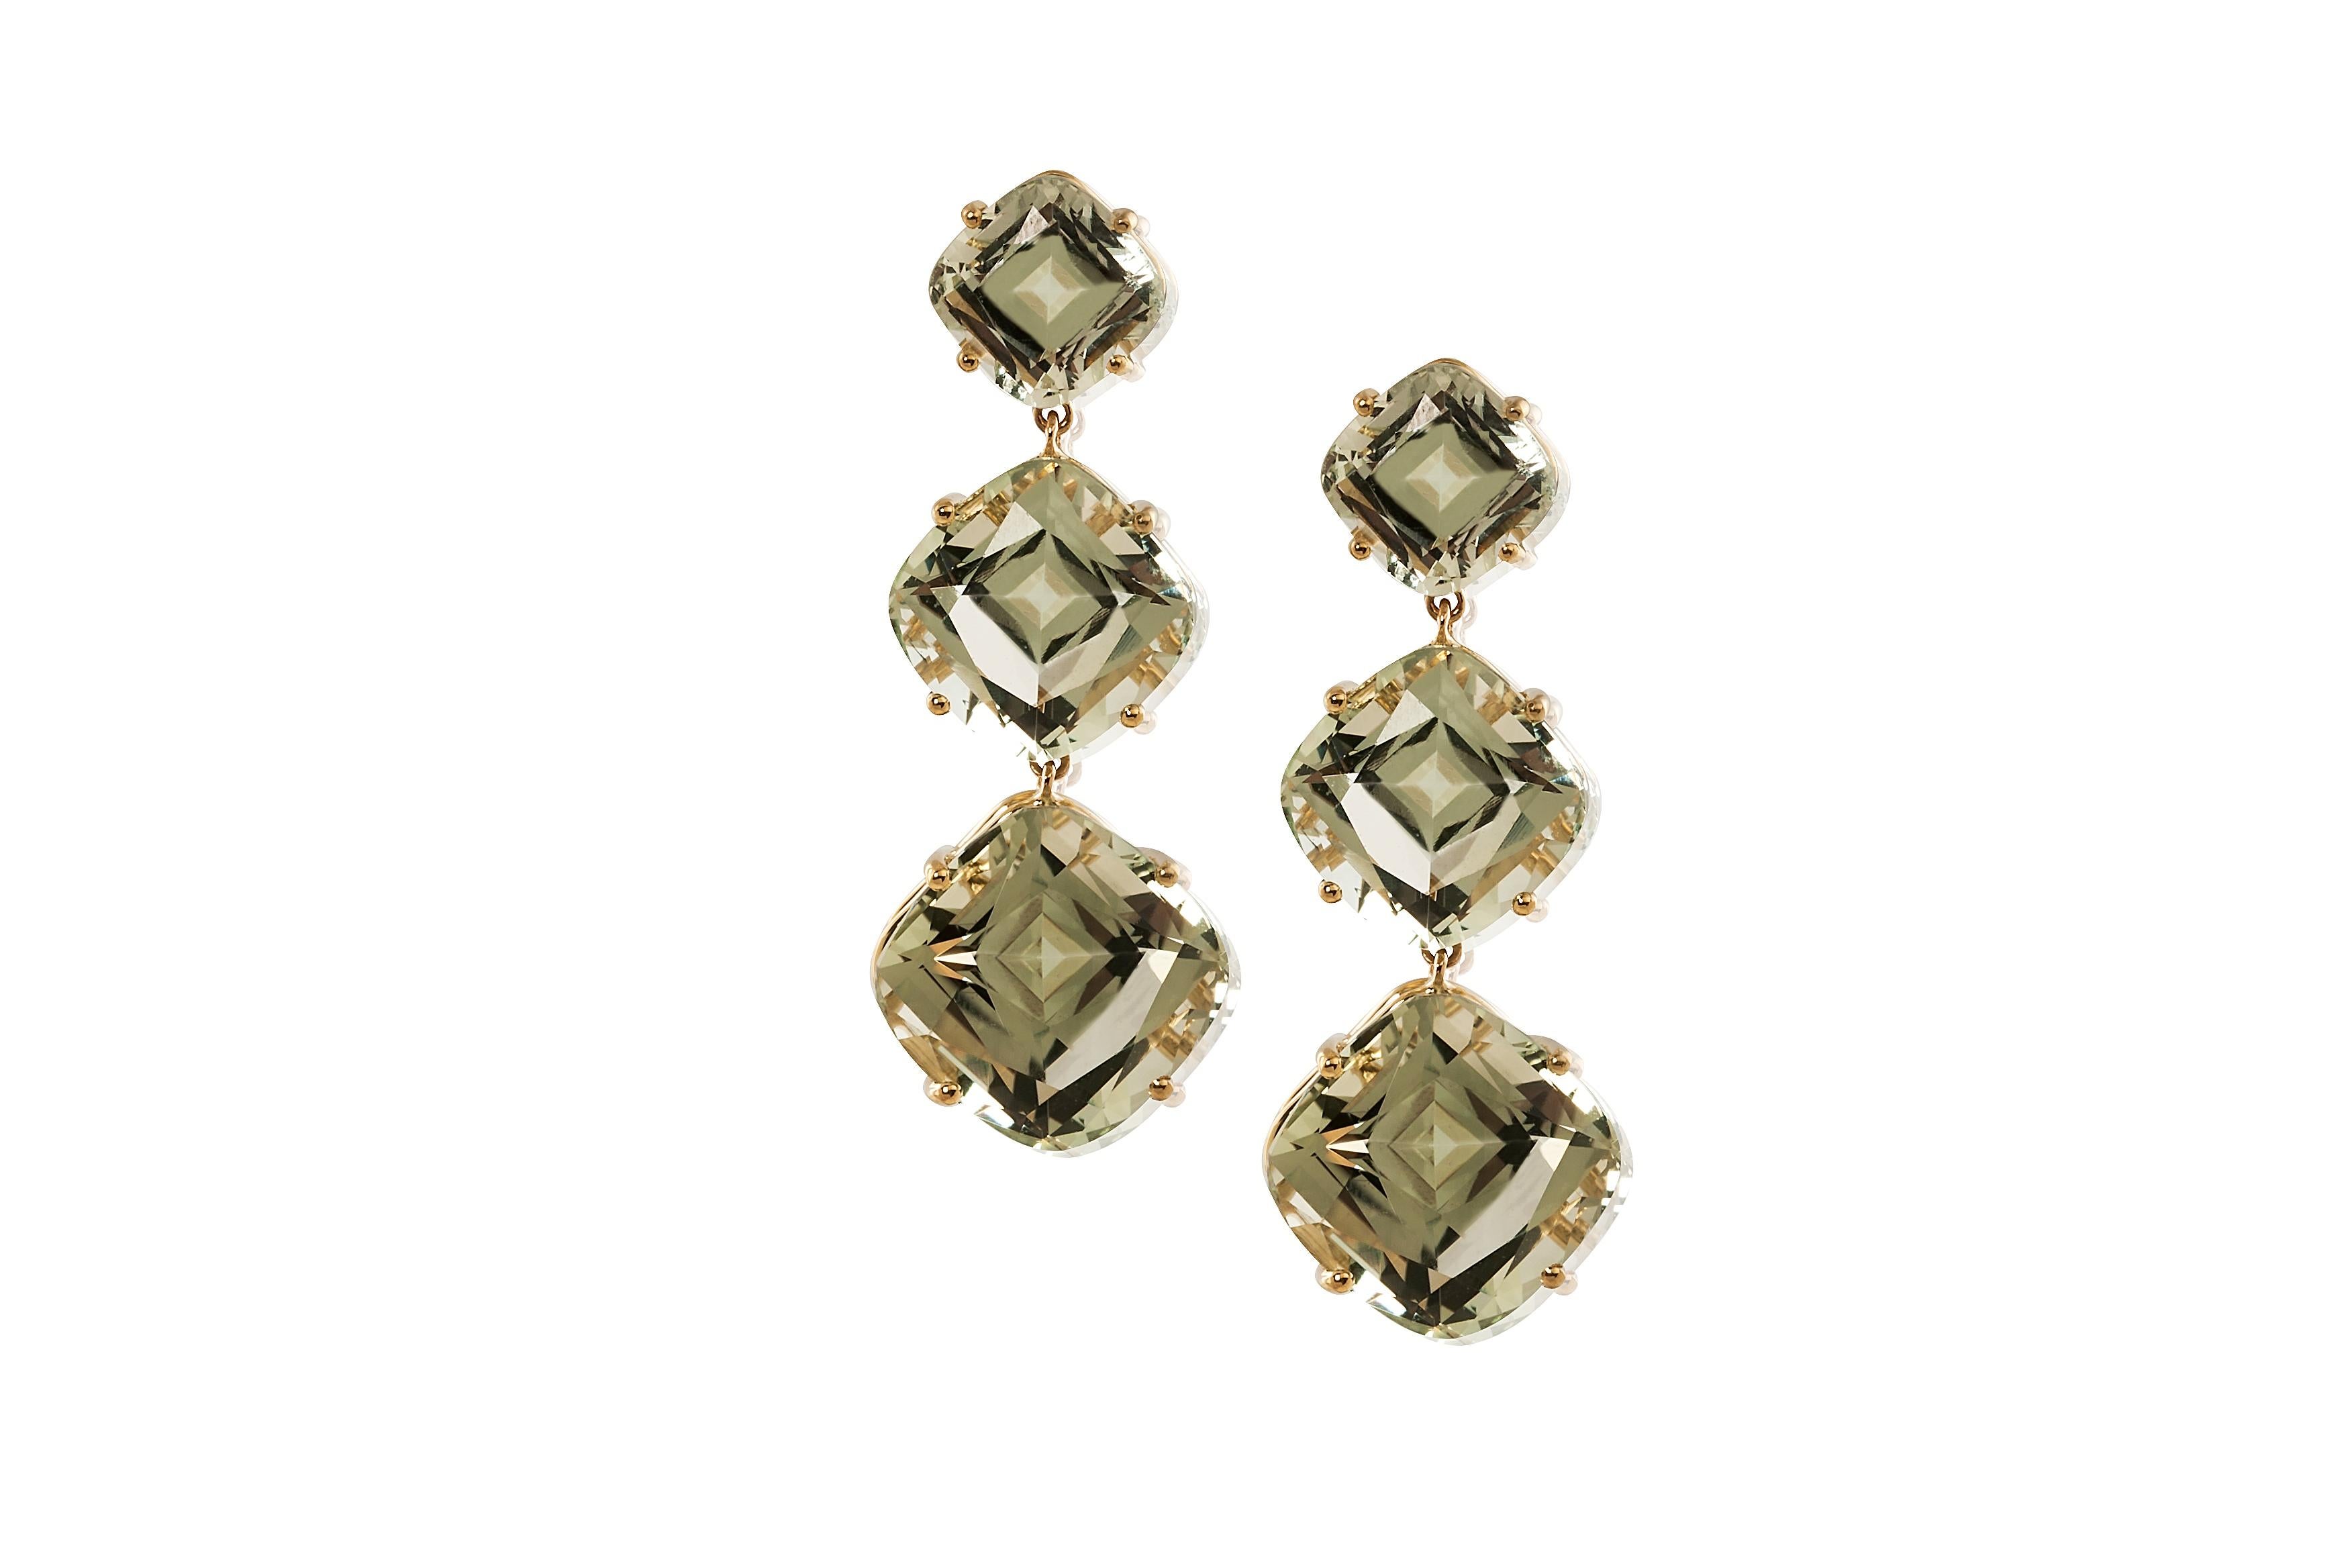 Prasiolite Cushion Earrings with Post in 18K Yellow Gold from 'Gossip' Collection 

Stone size: 9 x 9, 12 x 12, 14 x 14 mm 

Approx. Stone Weight: 42.71 Carats (Prasiolite)